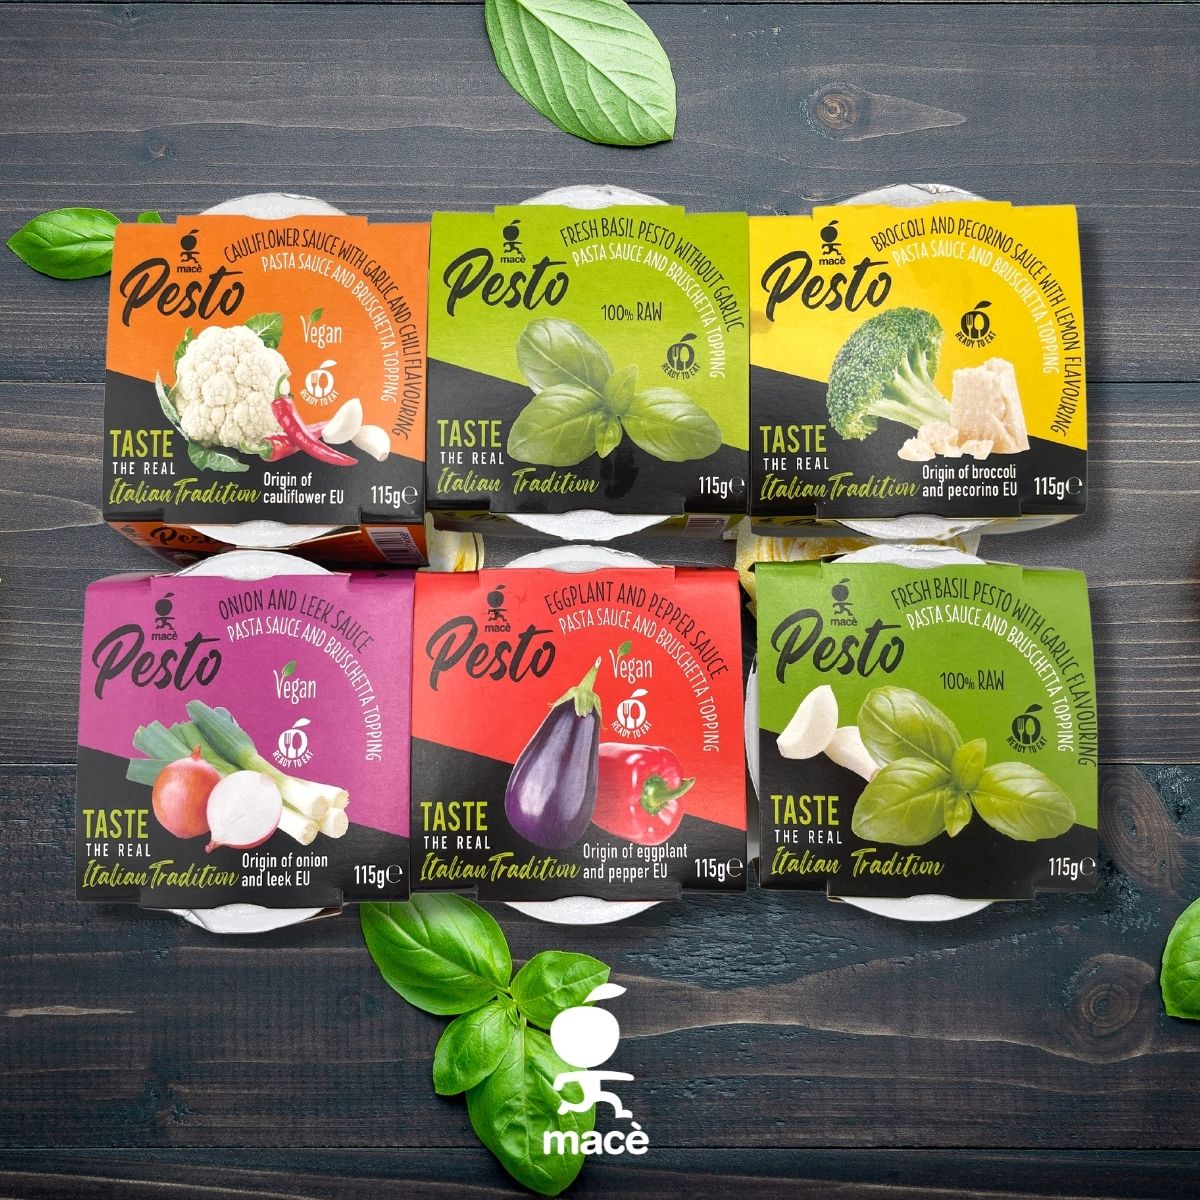   Traduzione  Seleziona lingua di arrivo Inglese (GB)  Mac's entire line of pestos and HPP sauces: Genovese pesto with and without garlic, pepper and eggplant sauce, cauliflower garlic and chilli sauce, broccoli and pecorino sauce, onion and leek sauce